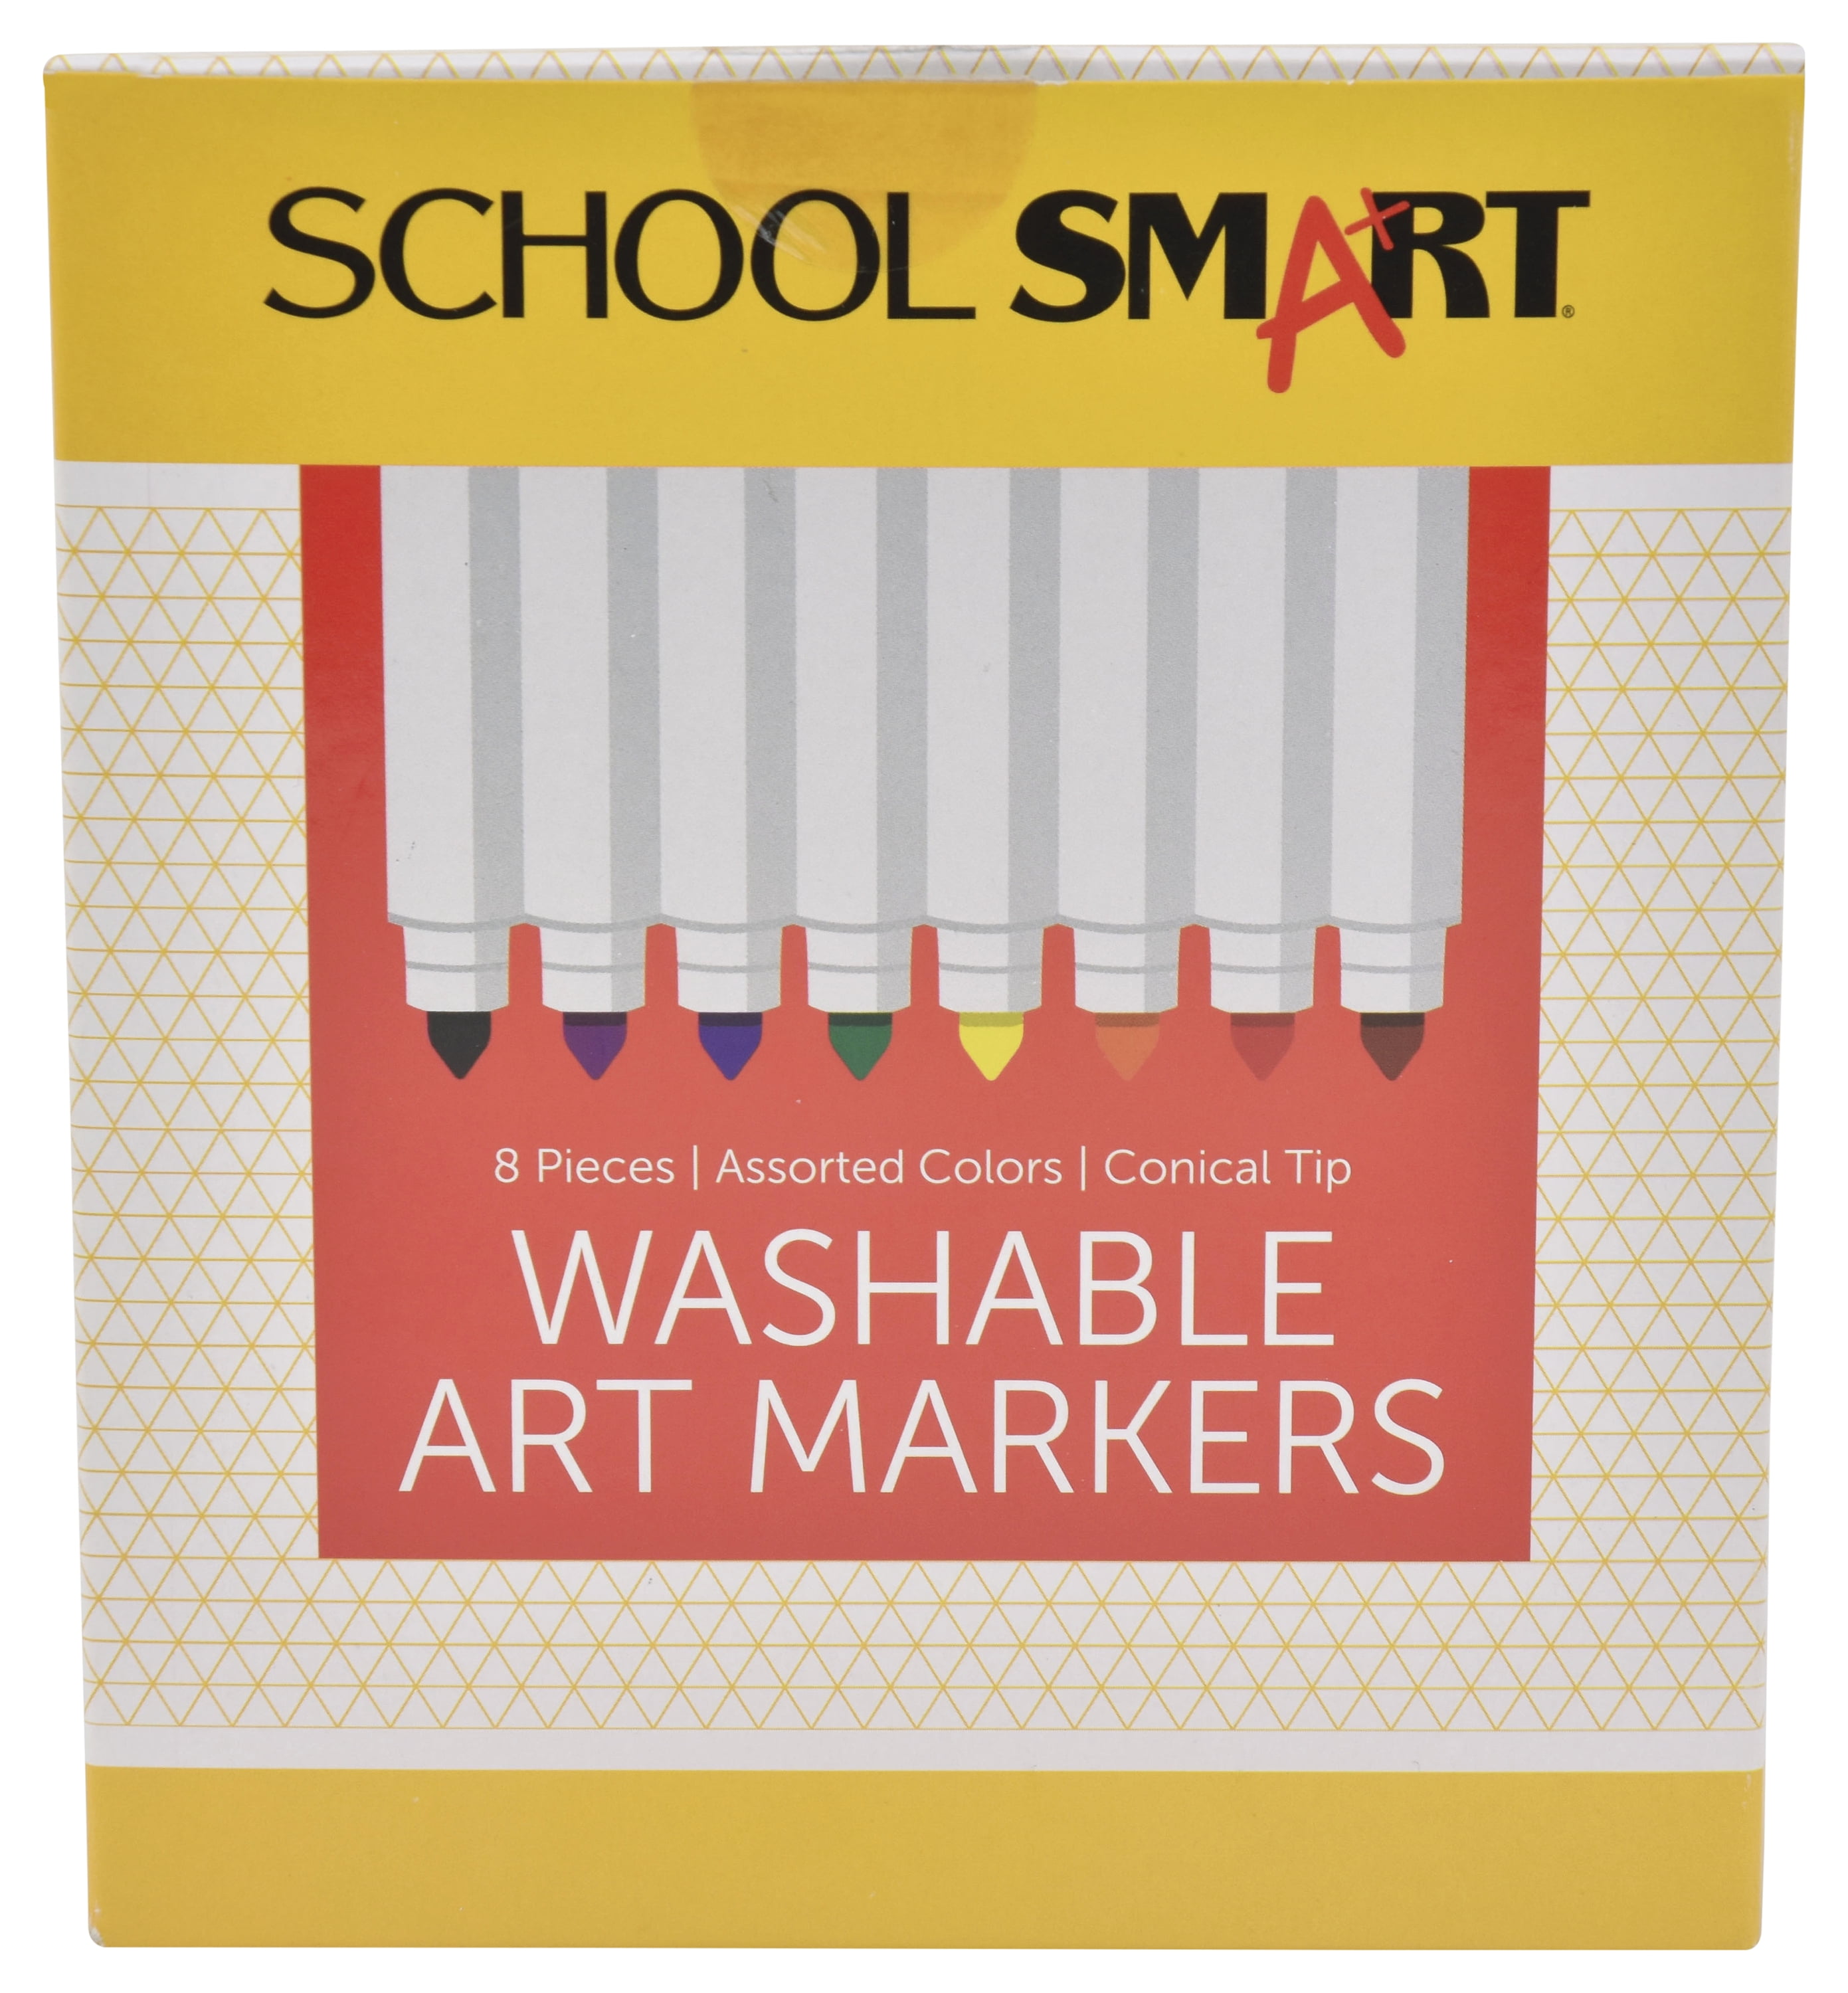  School Smart Washable Art Markers, Conical Tip, Black, Pack of  12 : Arts, Crafts & Sewing